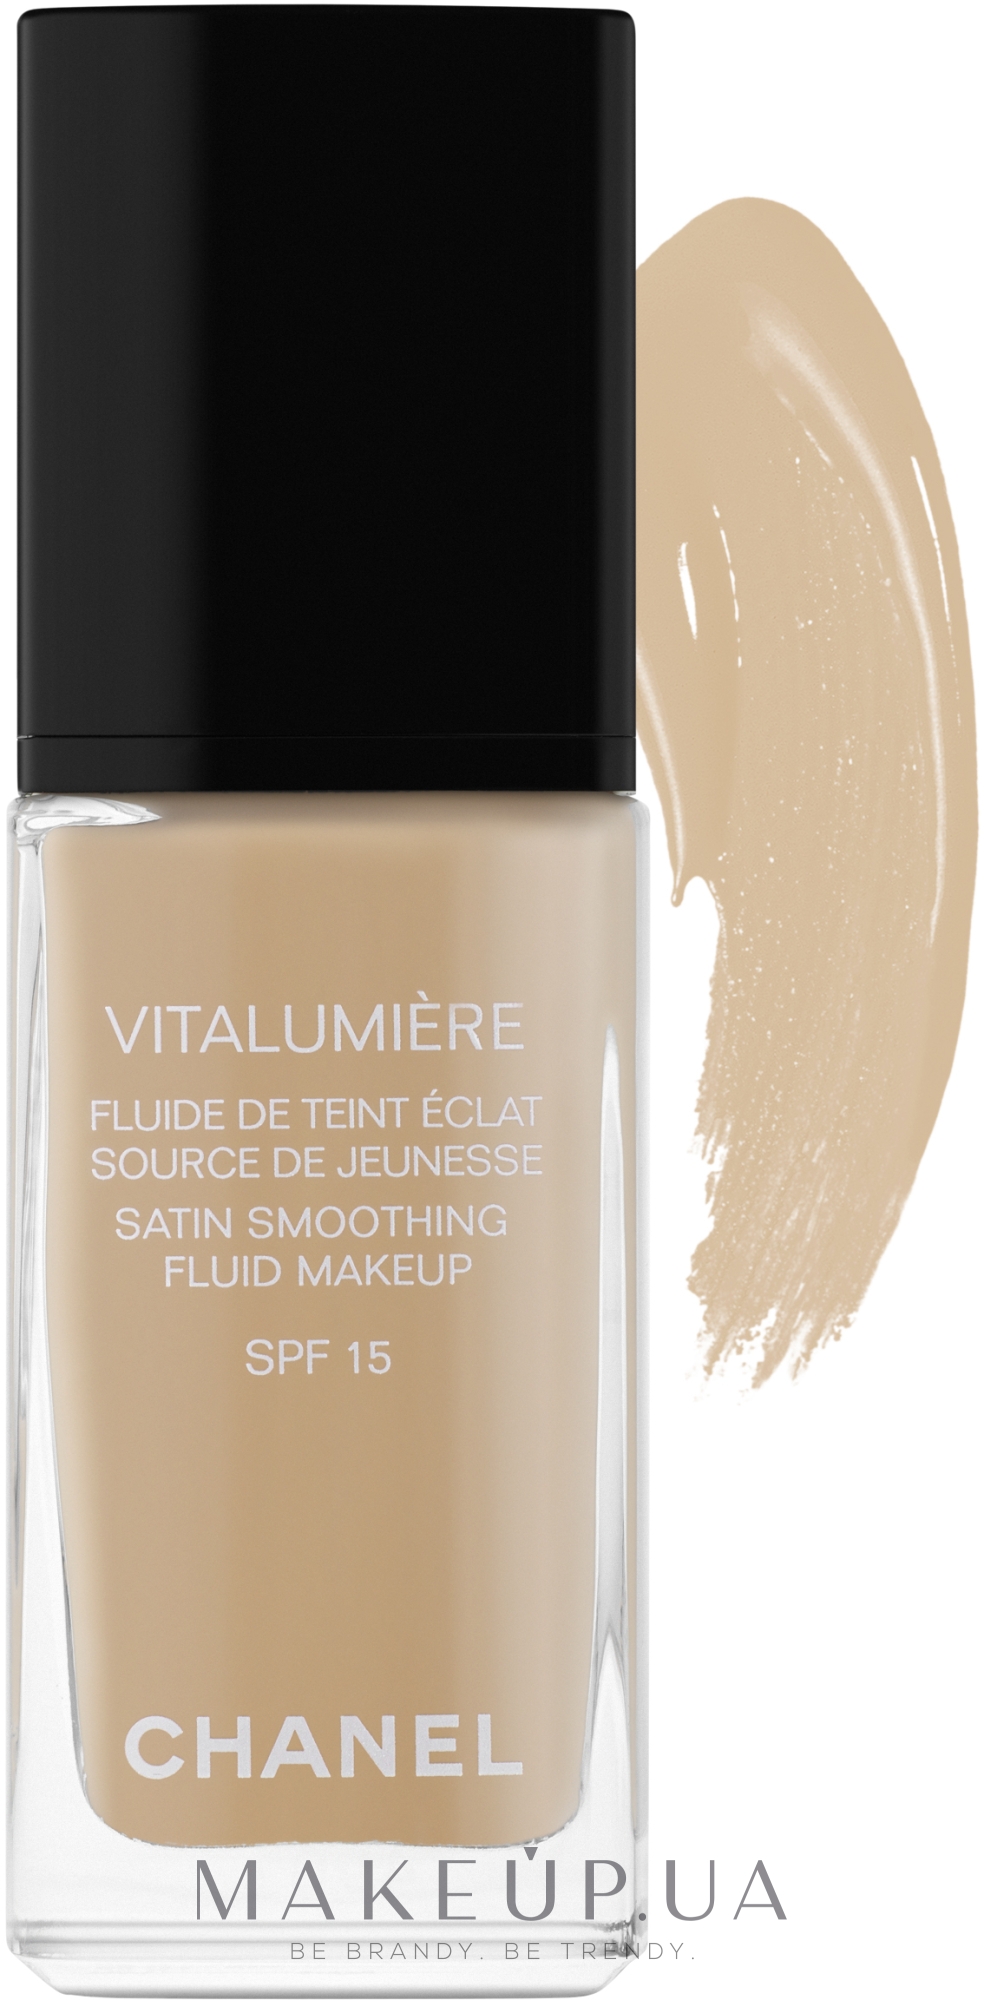 chanel vitalumiere satin foundation Quality Promotional Products &  Merchandise  Lowest Prices - Online shopping for the Latest Clothes &  Fashion - OFF-54% >Free Delivery